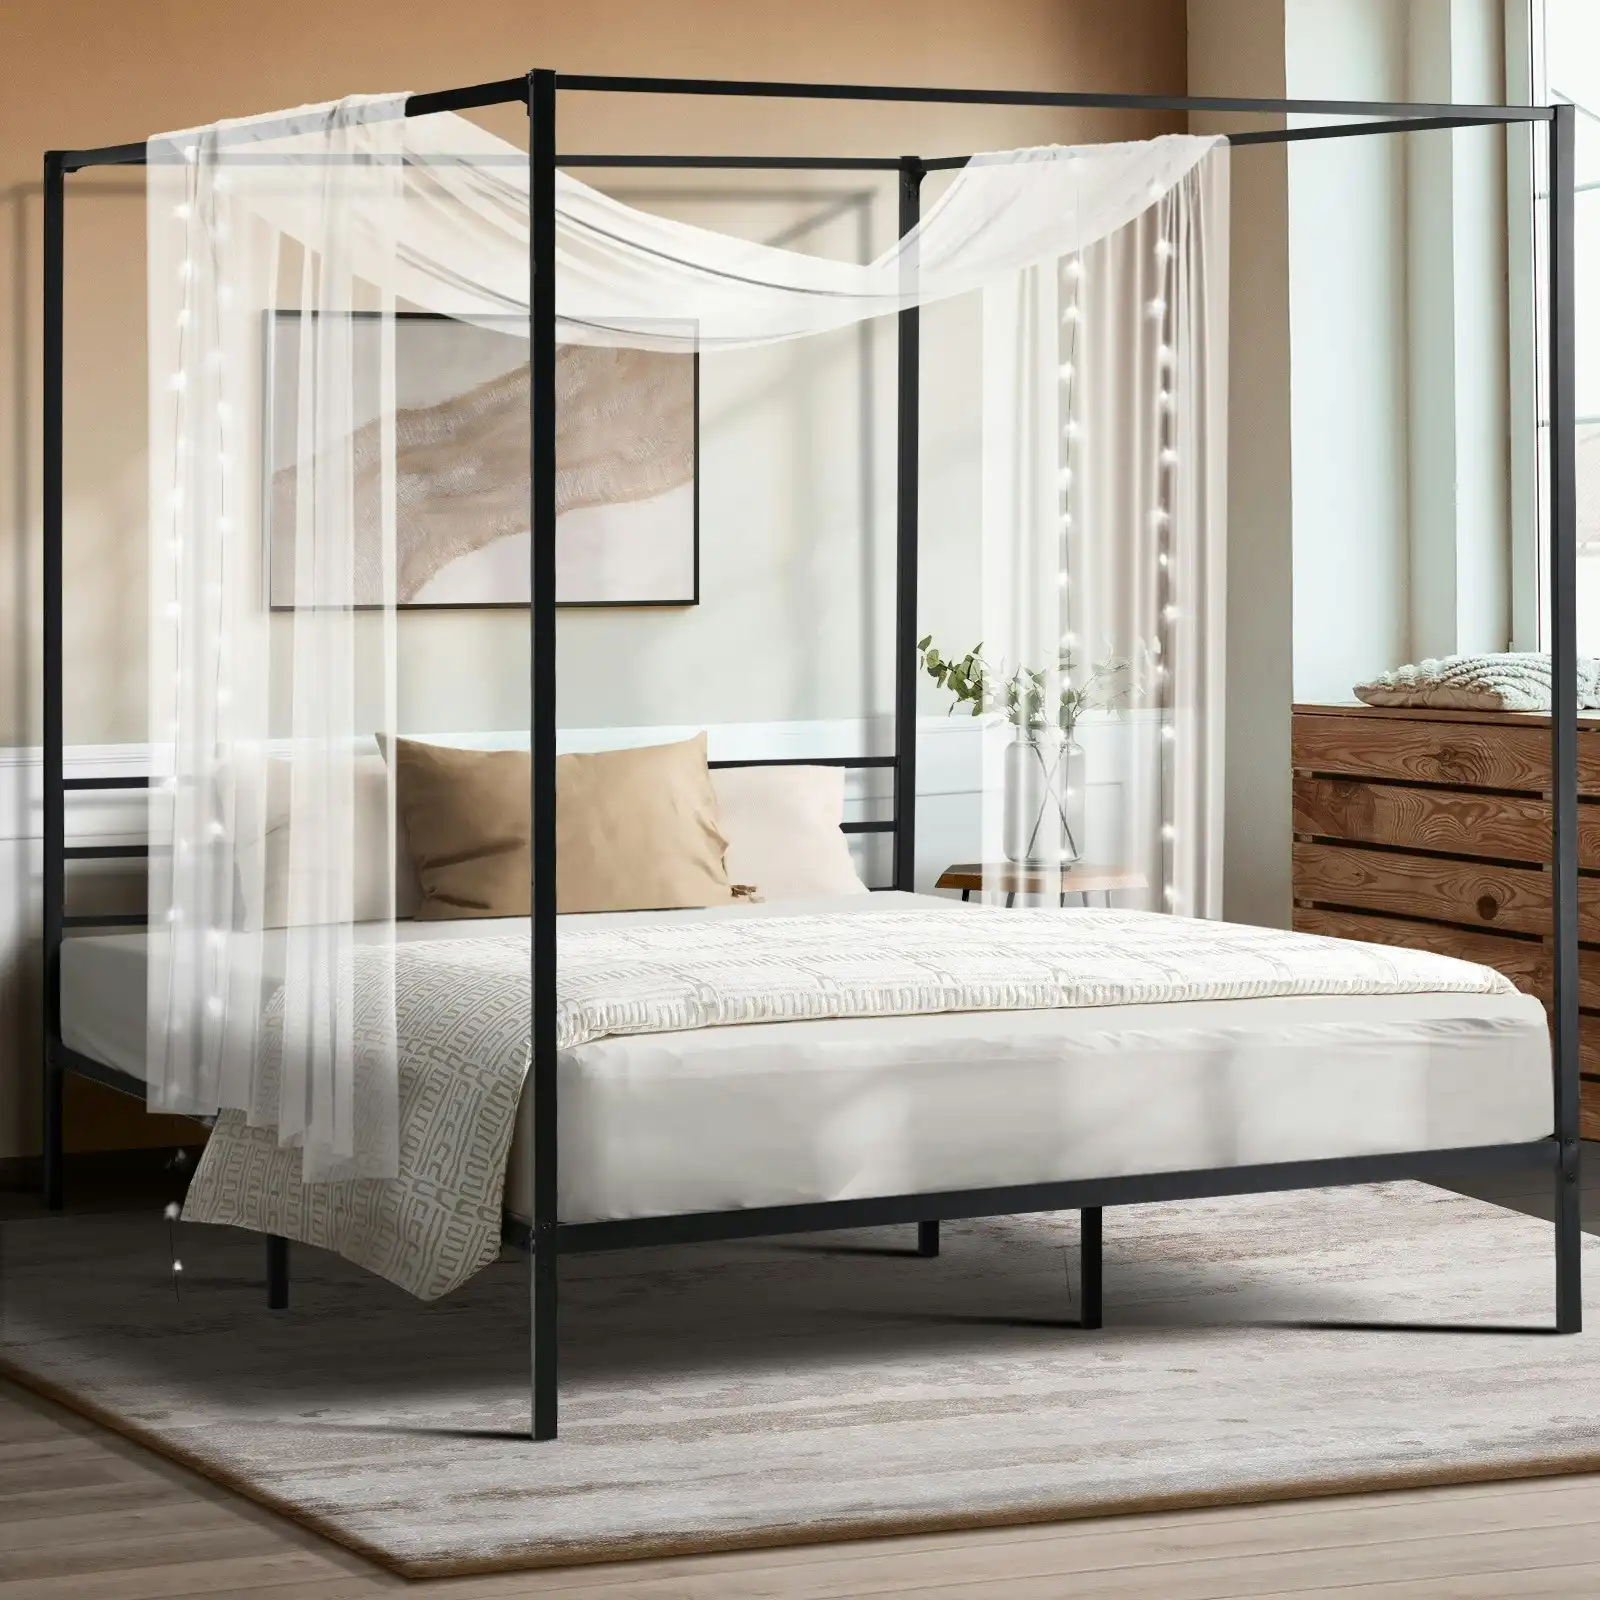 Oikiture Metal Canopy Bed Frame Double Size Platform